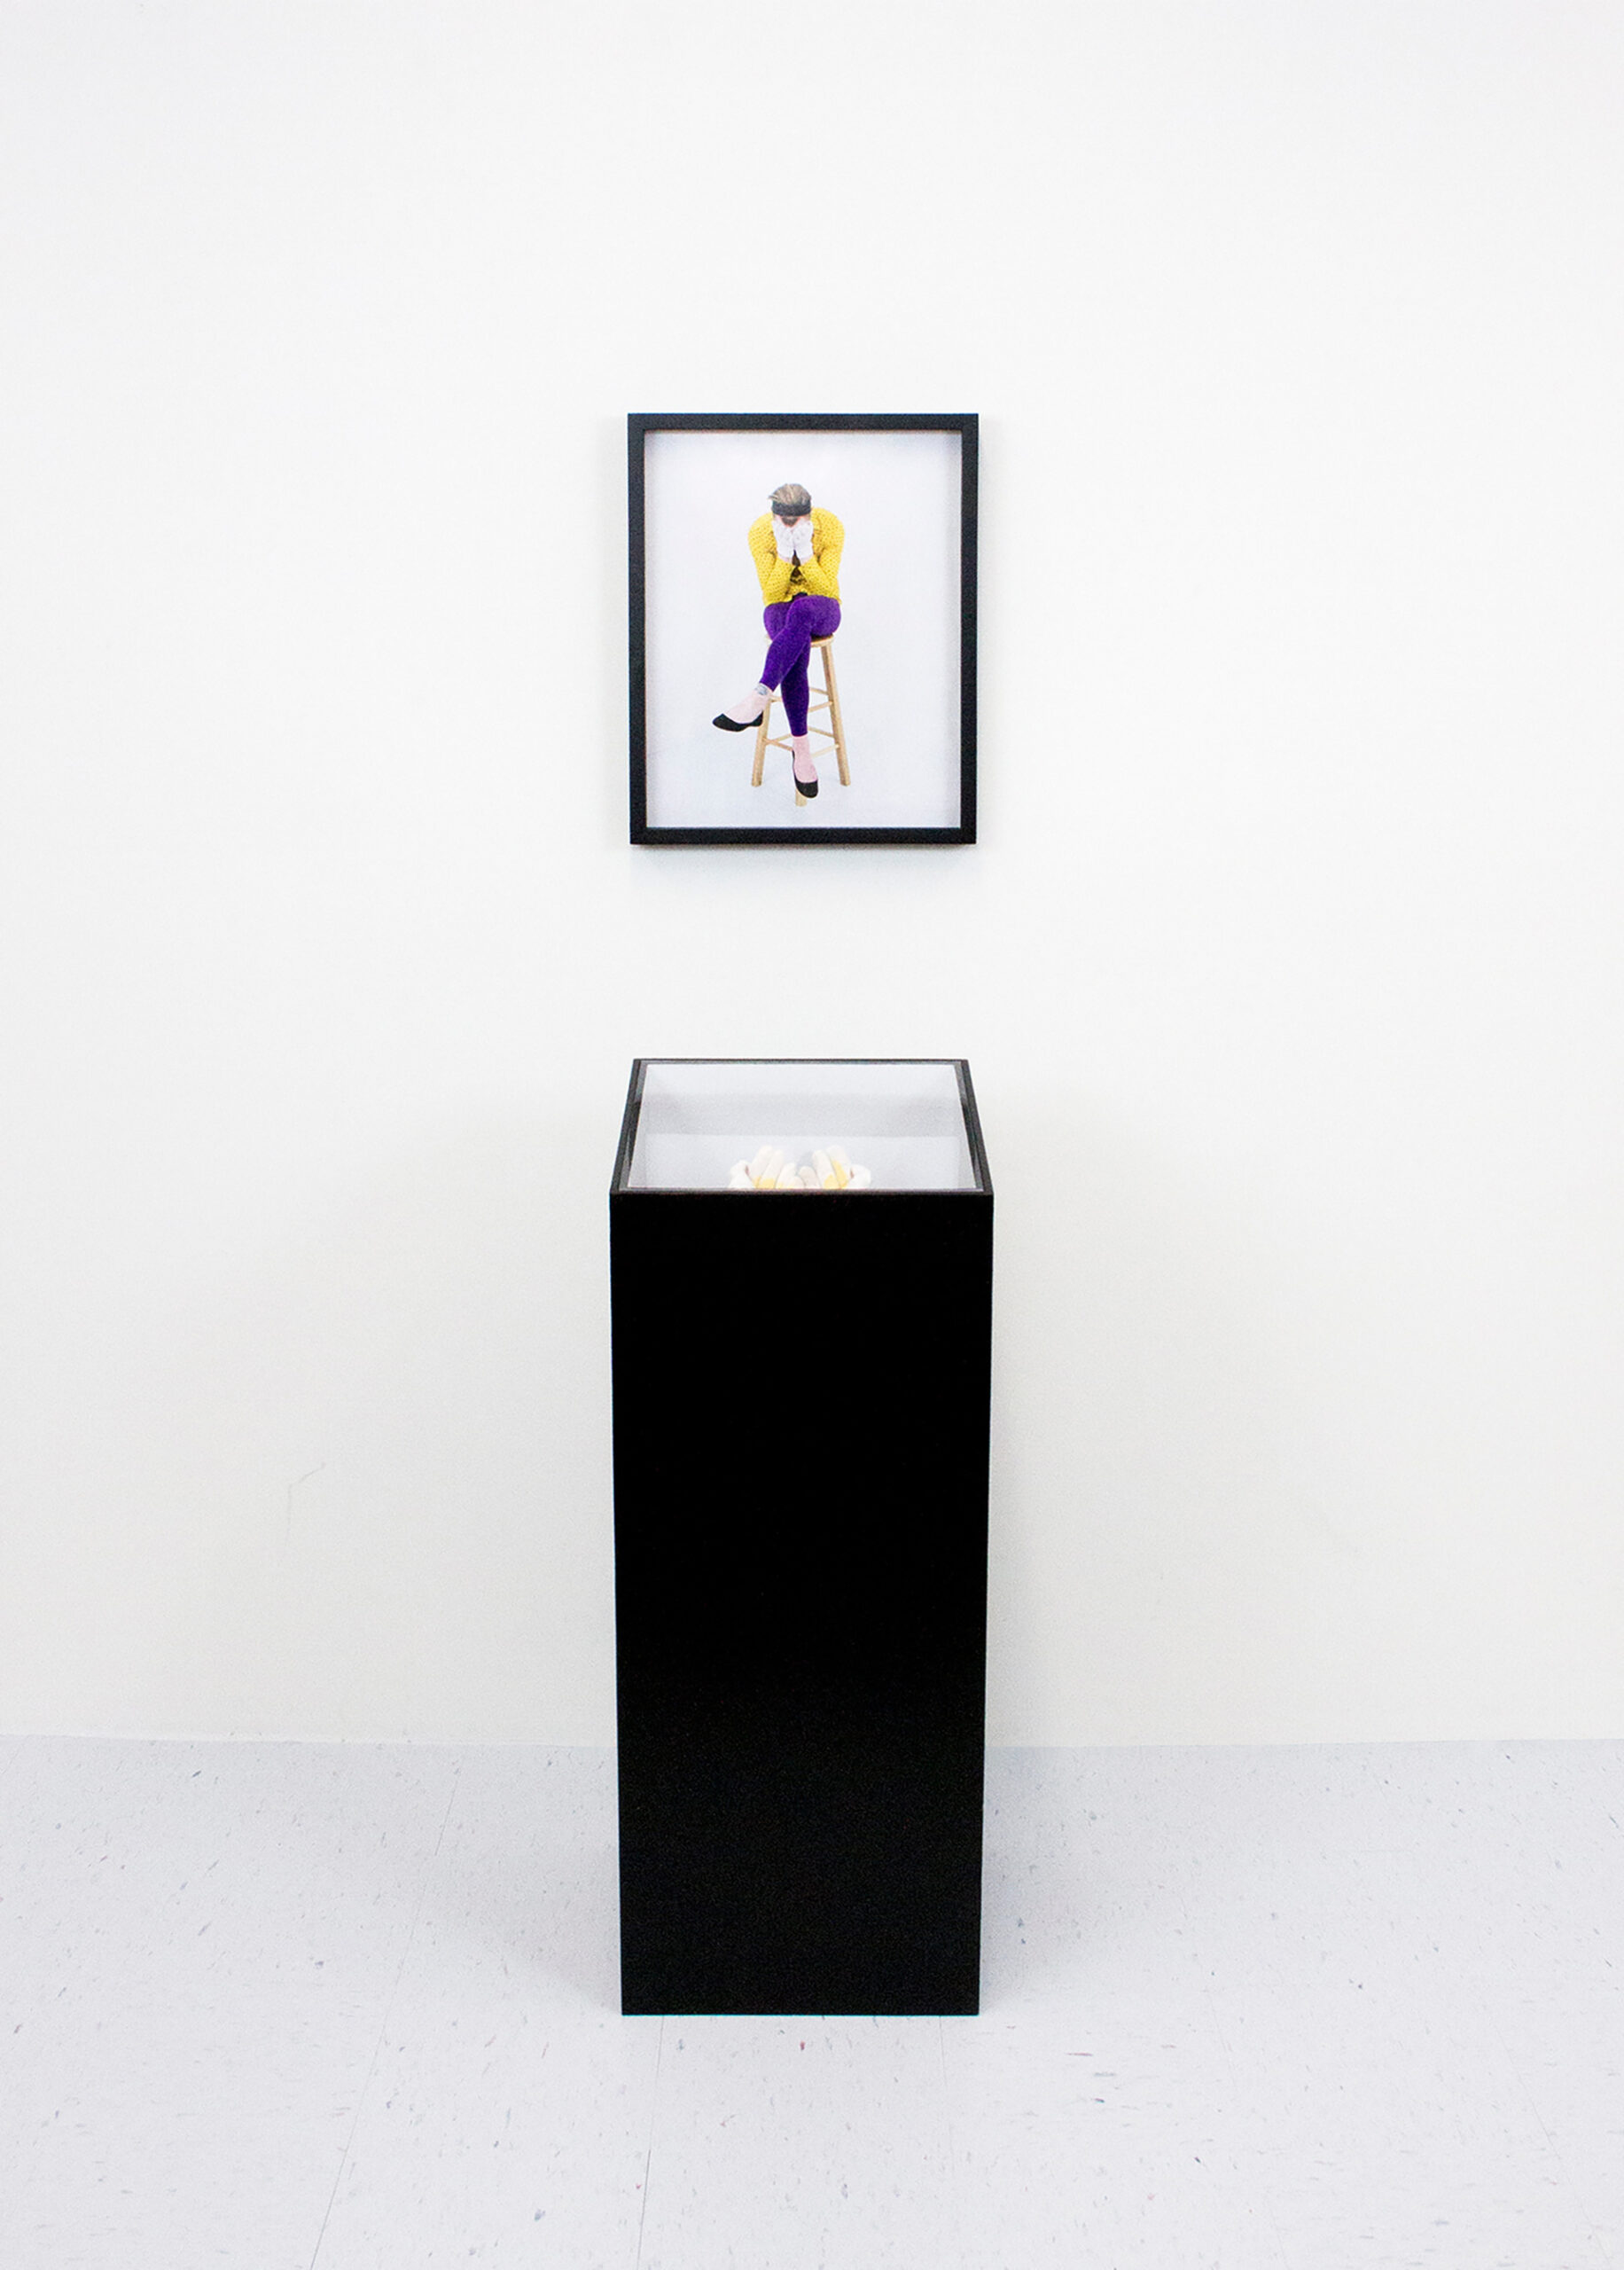 Framed photo of the artist and pedestal containing remnants from I'm a Loser performance